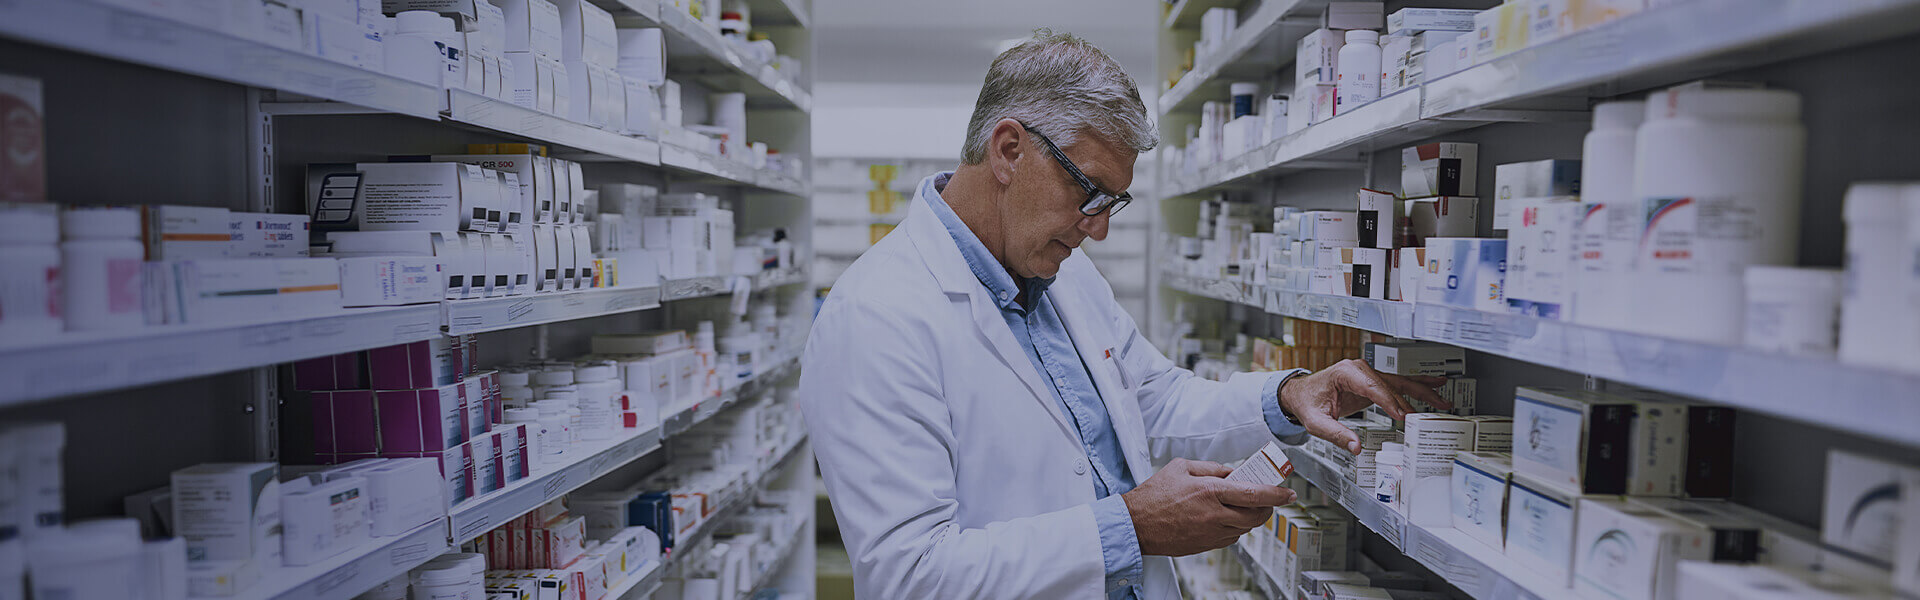 Image of pharmacist looking at a medicine label